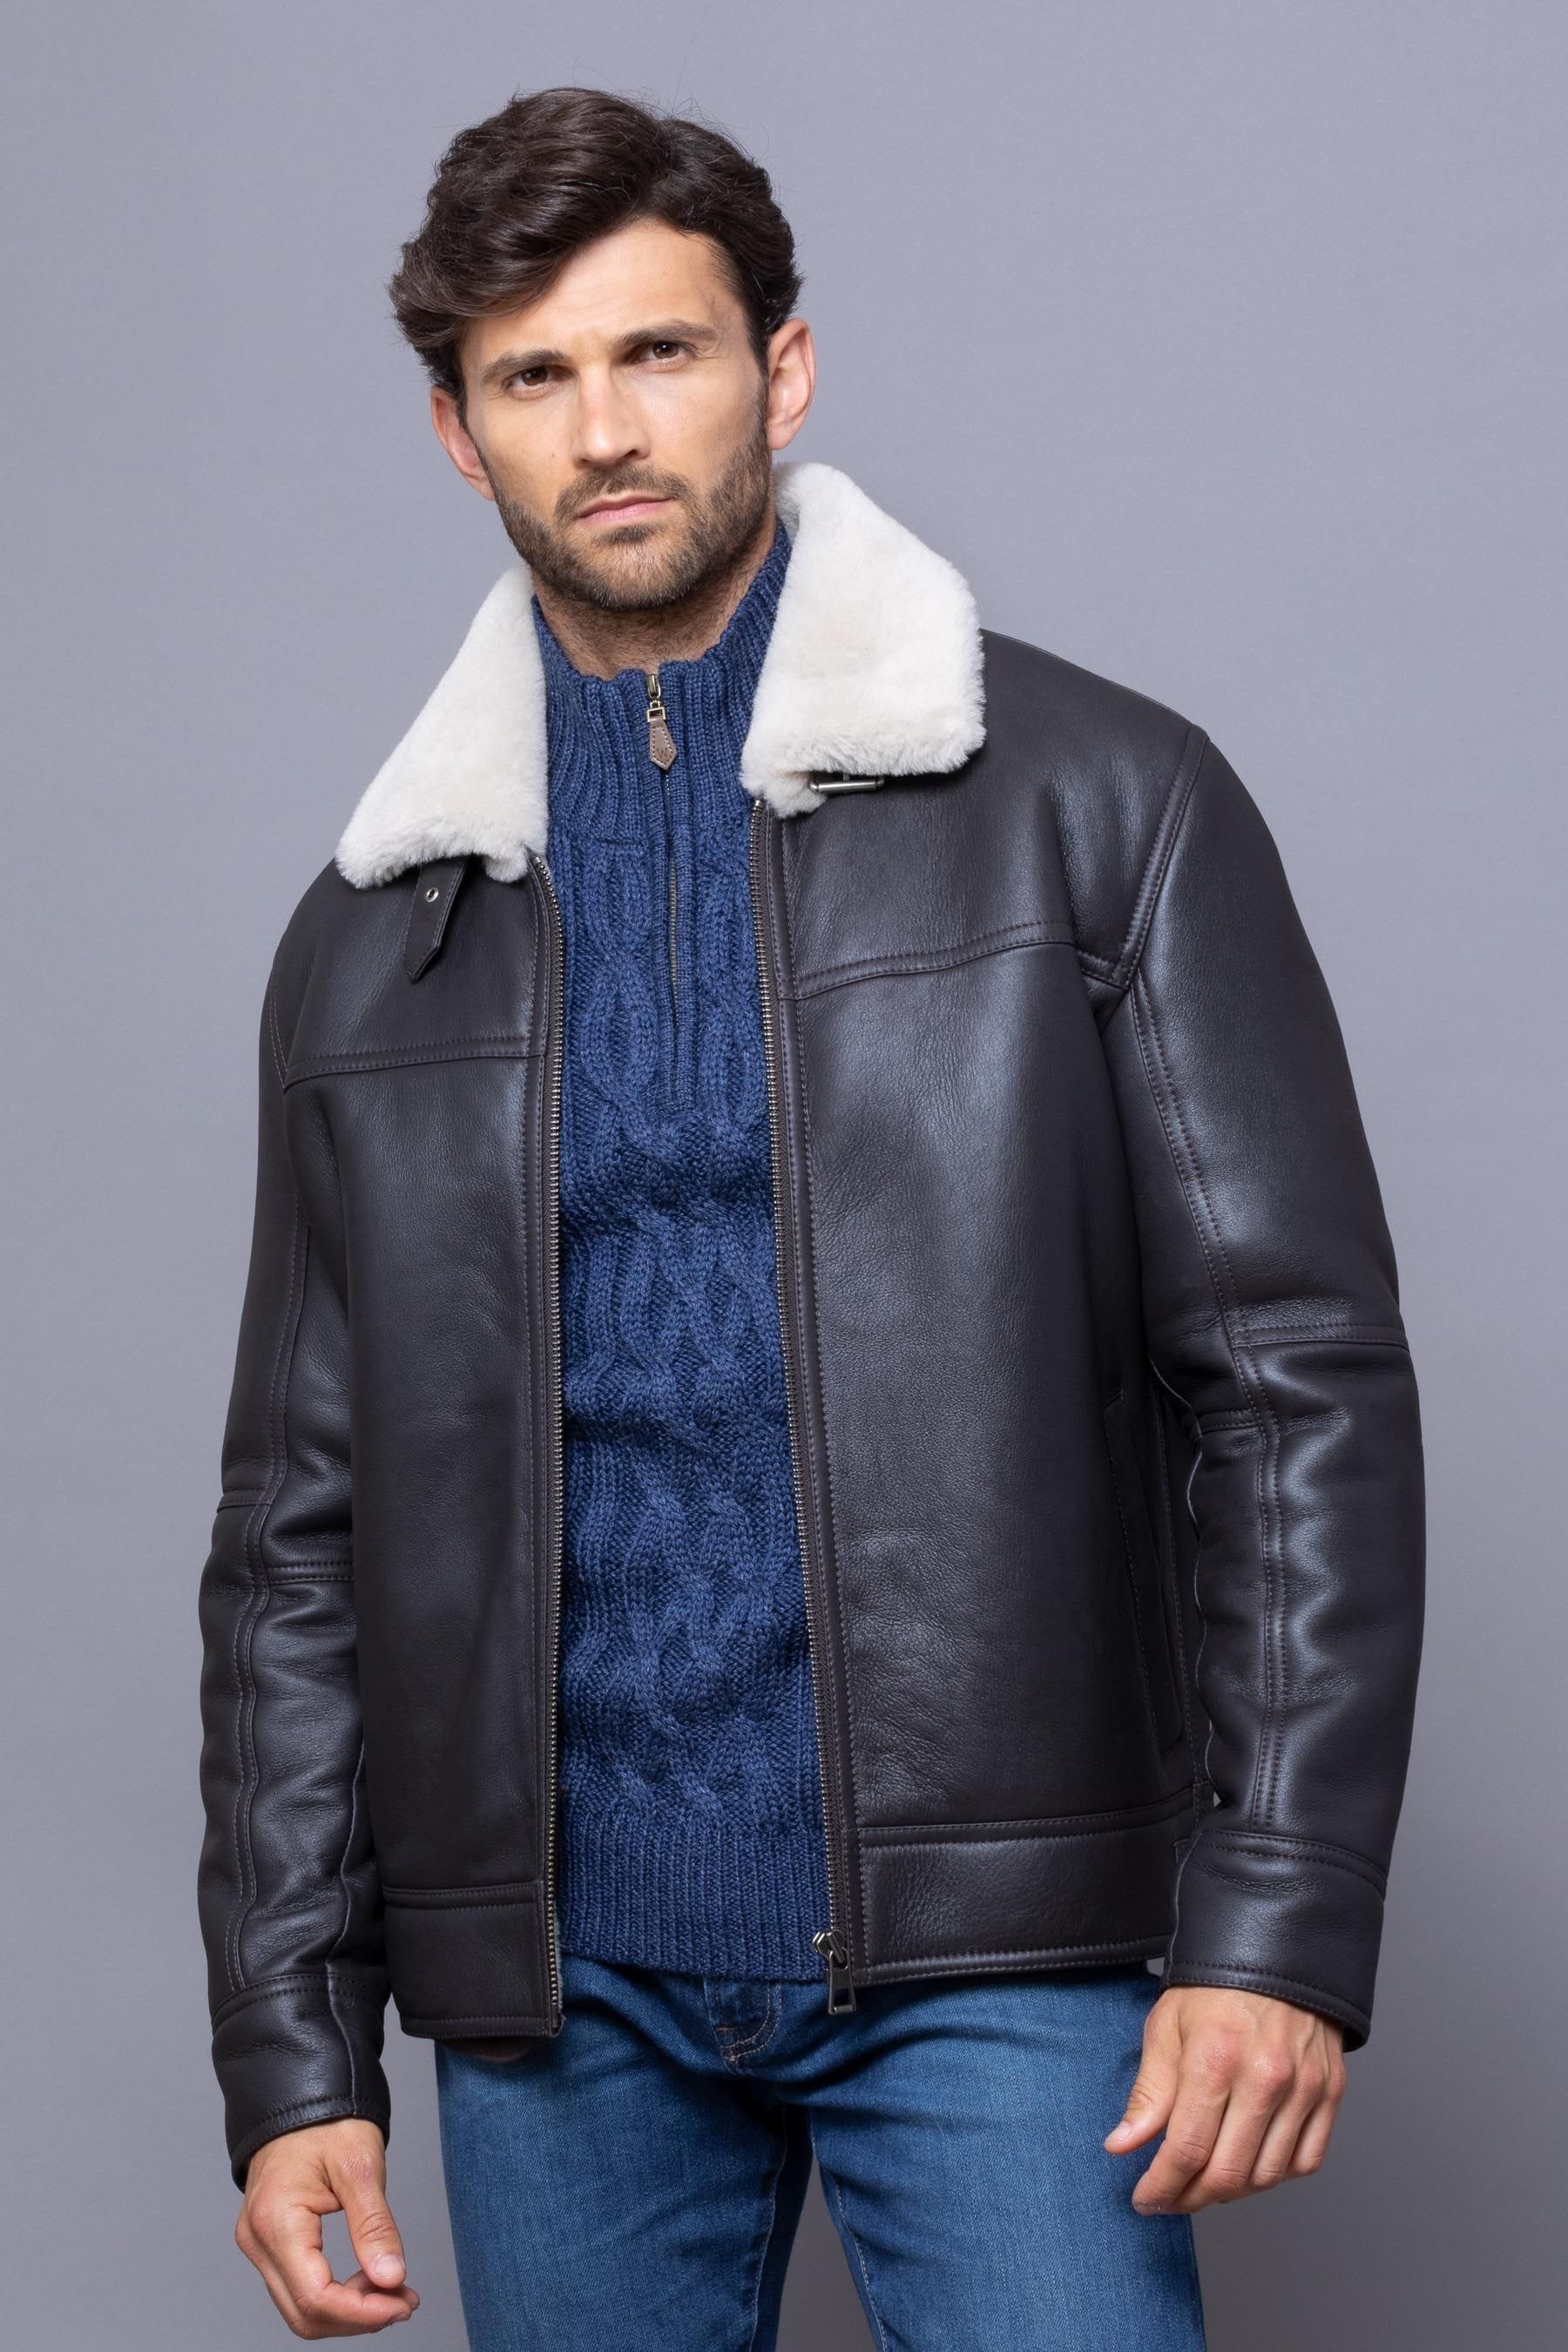 Buy Lakeland Leather Brown Spitfire Sheepskin Aviator Jacket from the ...